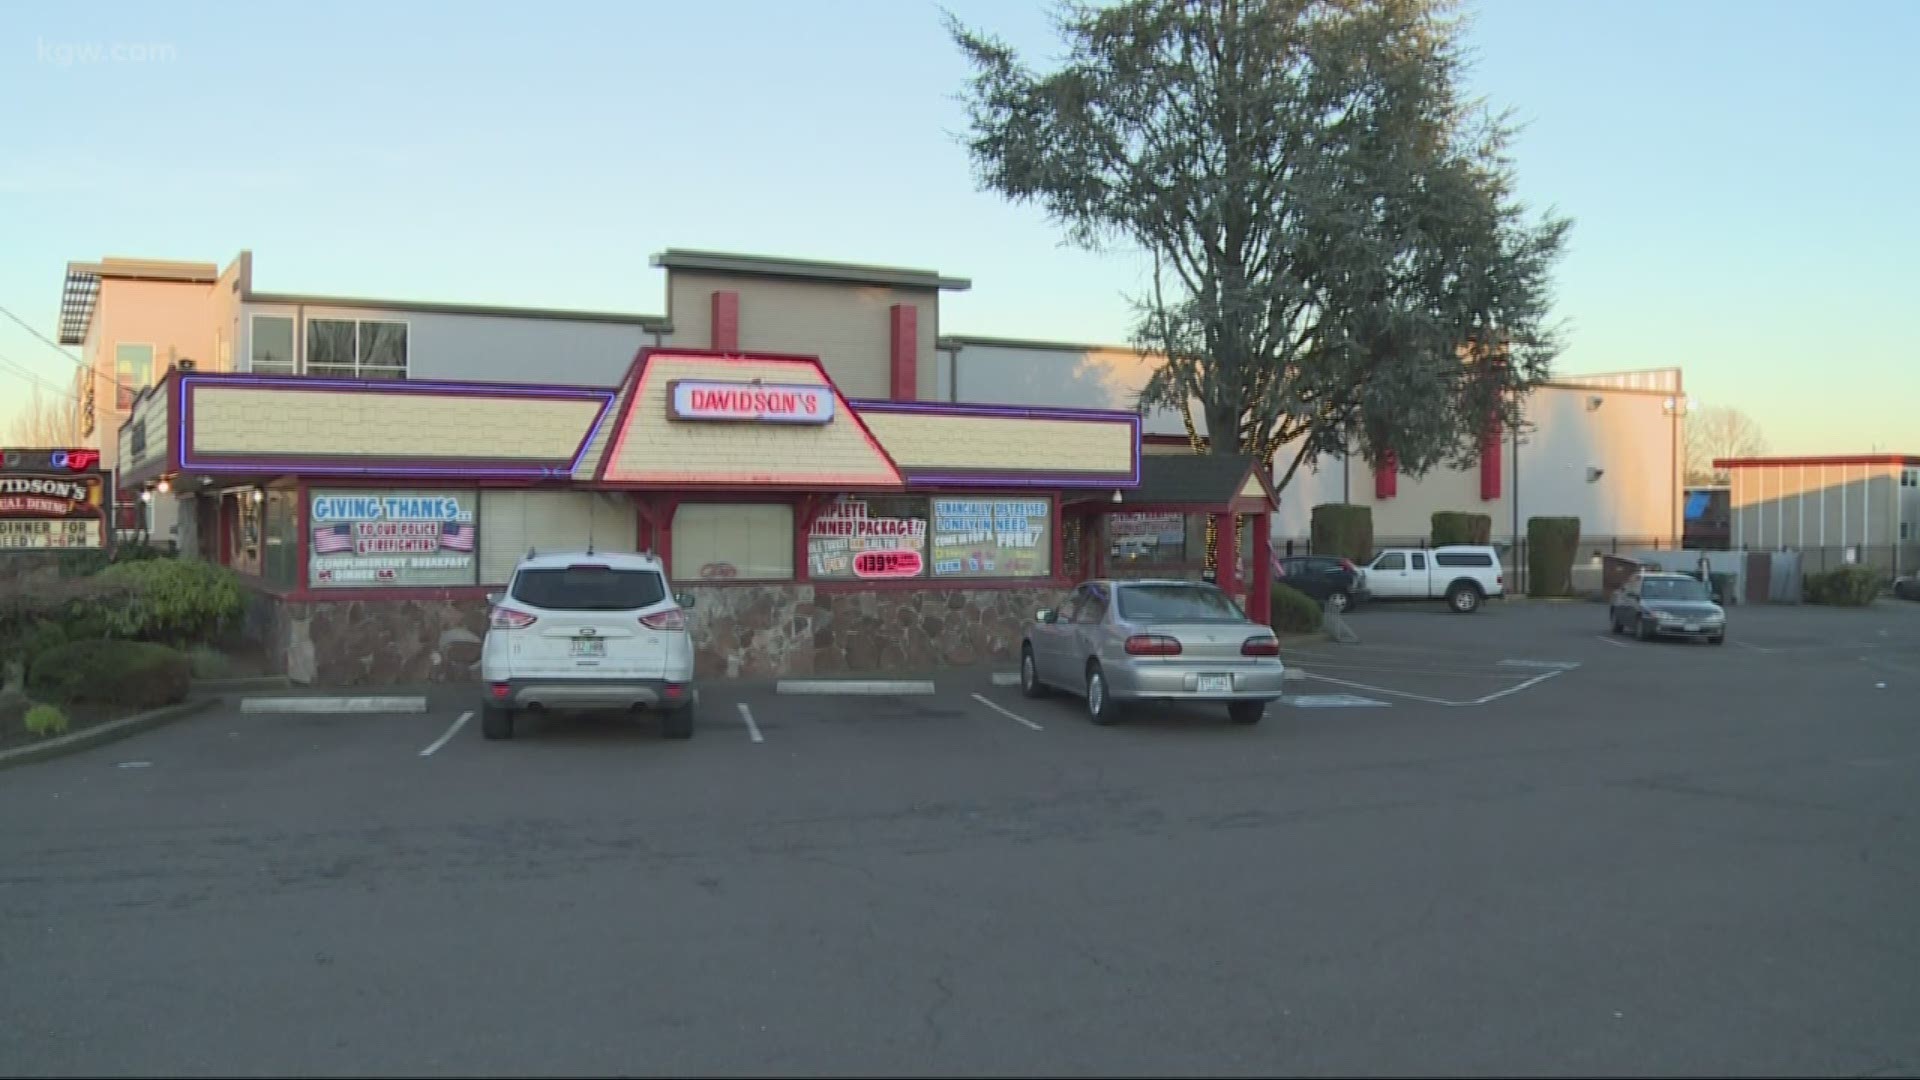 A Tigard family is letting people in need eat at their restaurant for free once a month.